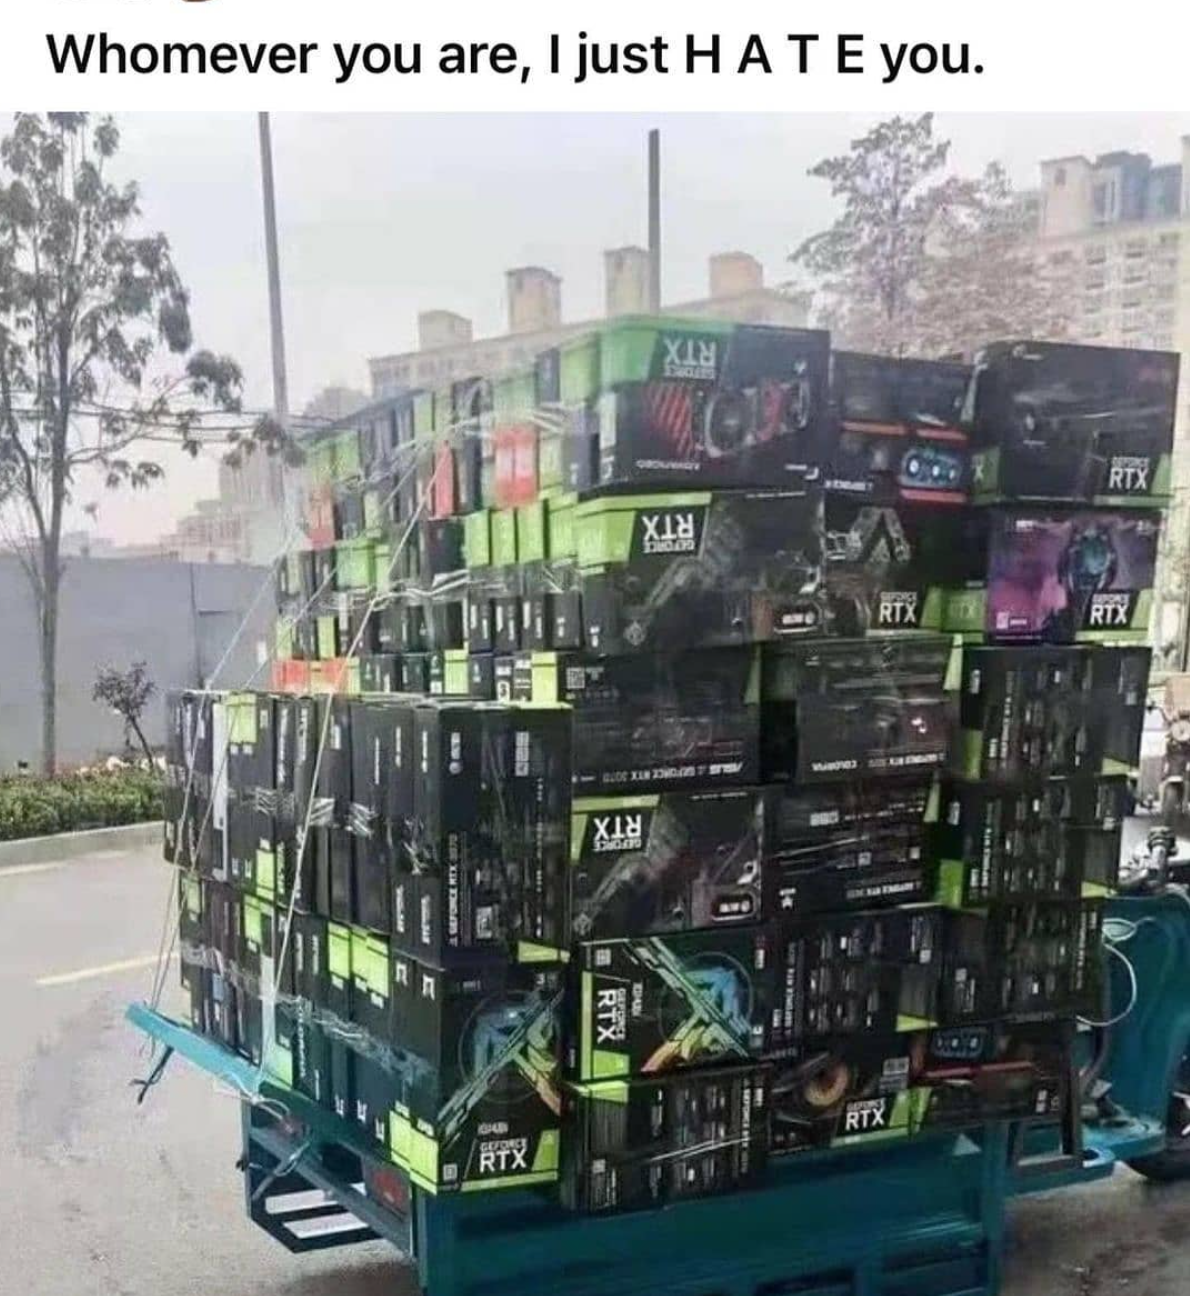 funny gaming memes  - vehicle - Whomever you are, I just Hate you. Yih Rtx Rtx Rtx